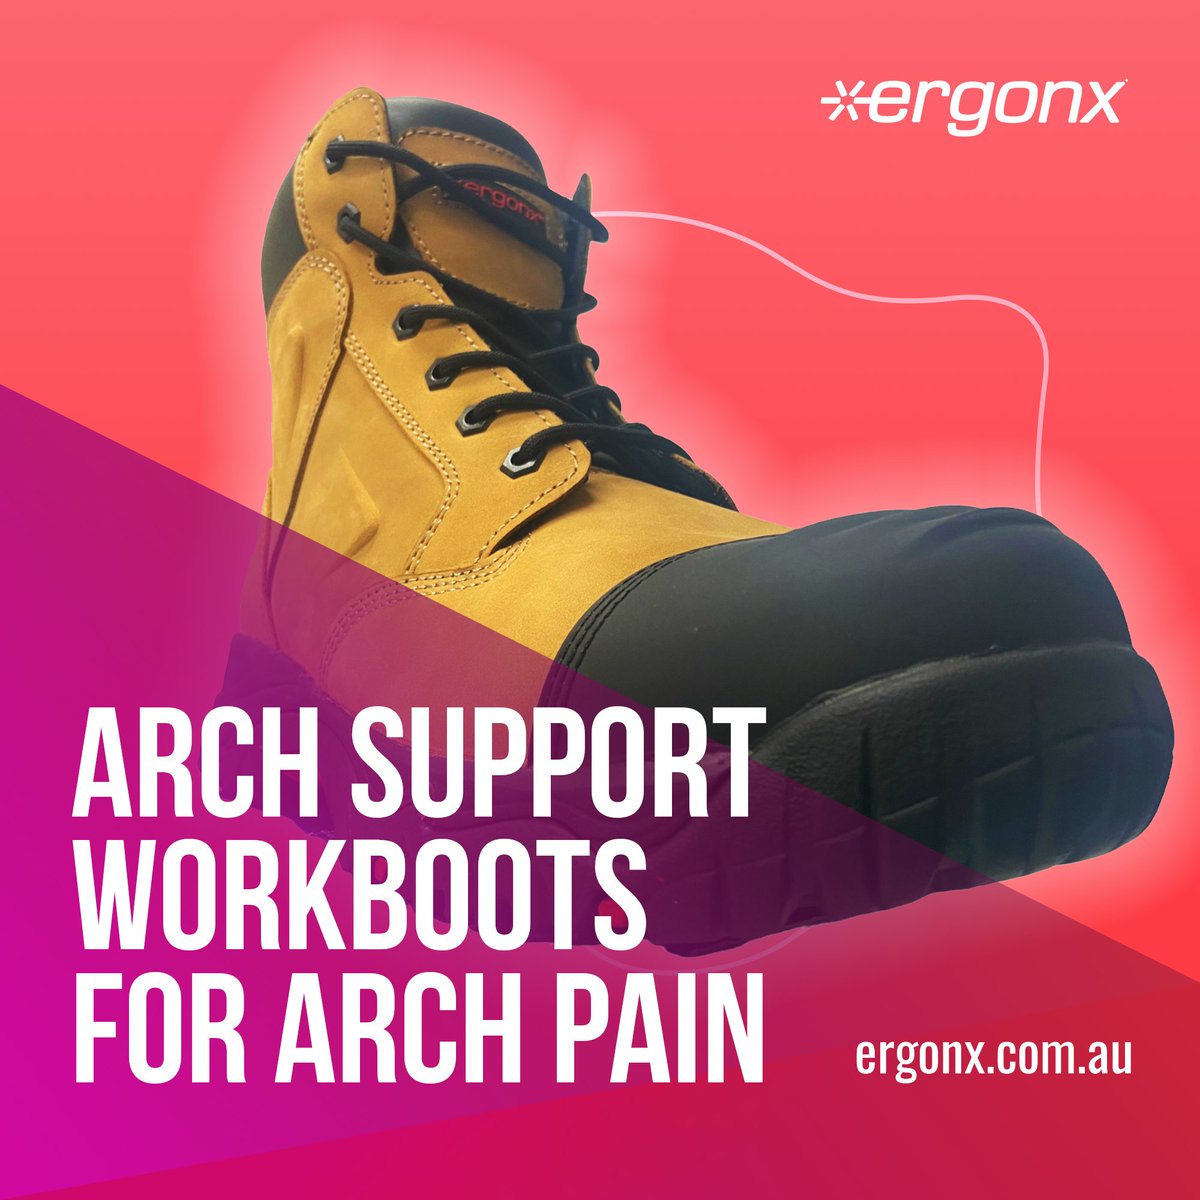 Experience ultimate comfort on the job with our Arch Support Workboots! 🛠️ Designed by podiatrists, our boots feature orthotic insoles to combat overpronation, reducing arch pain and discomfort. 🦶 Plus, enjoy cushioned support with a soft midsole and shock-absorbing insole.